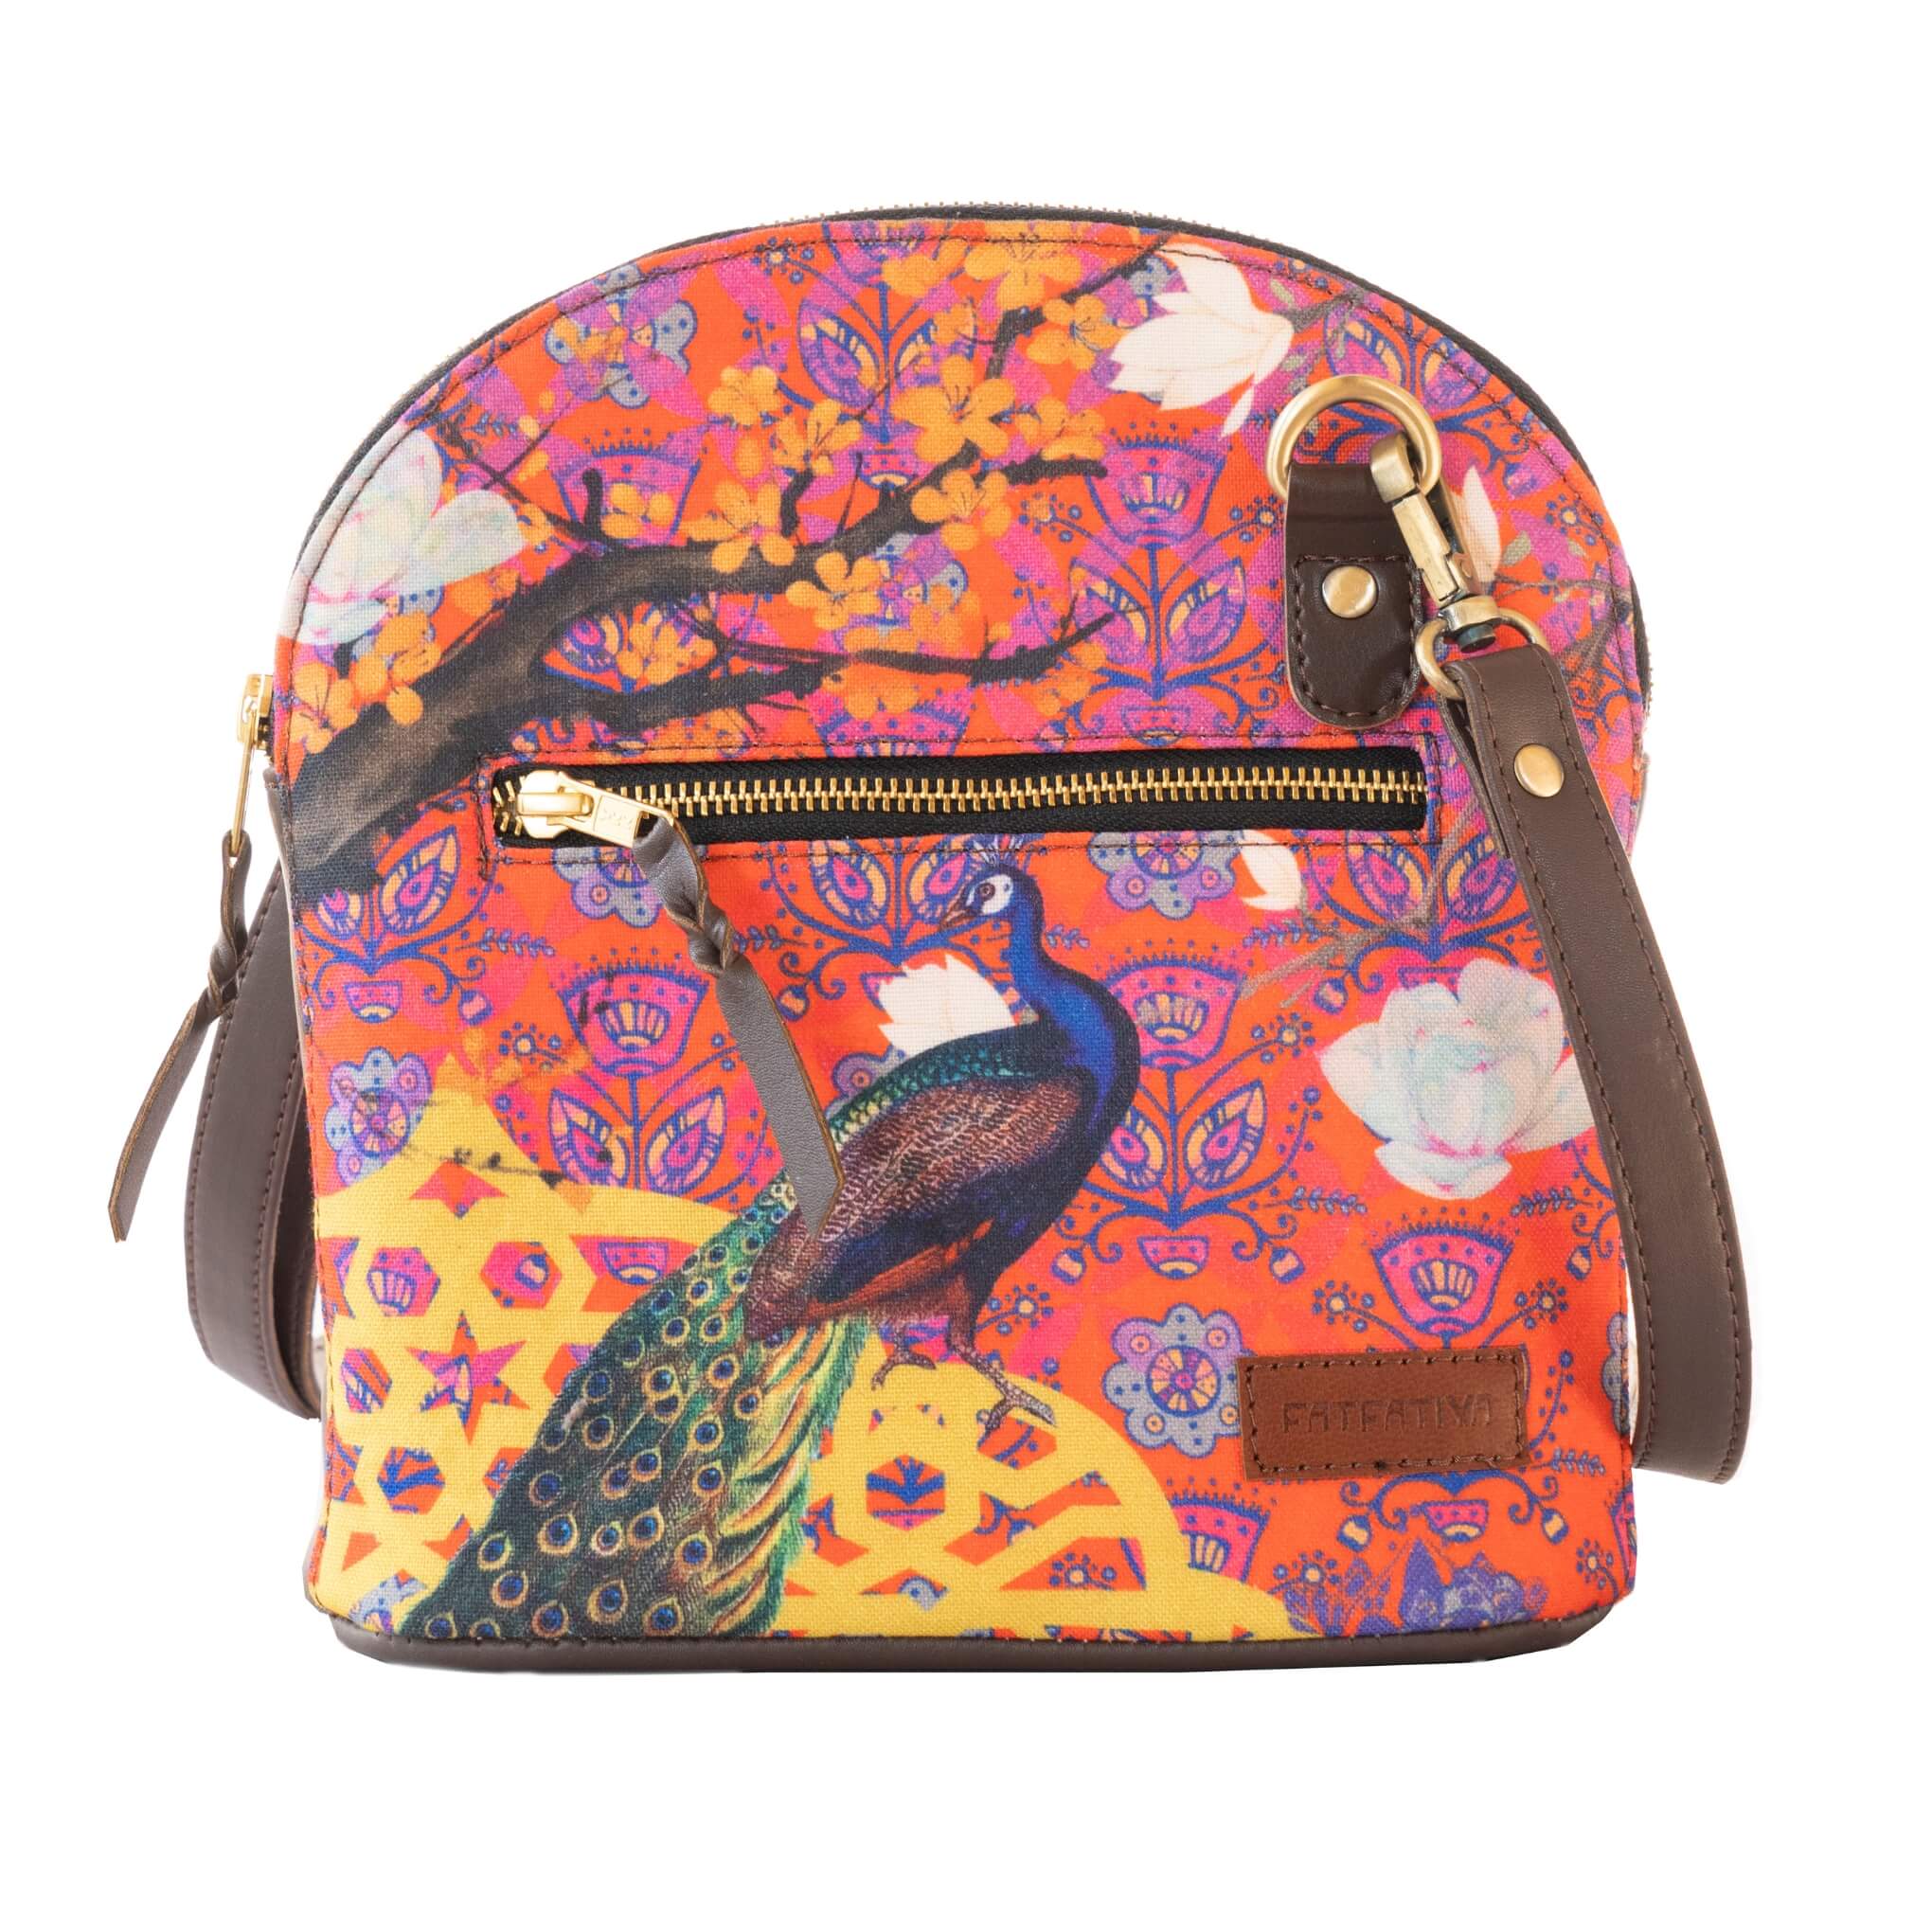 The Song of Peacock Crossbody Shoulder Bag